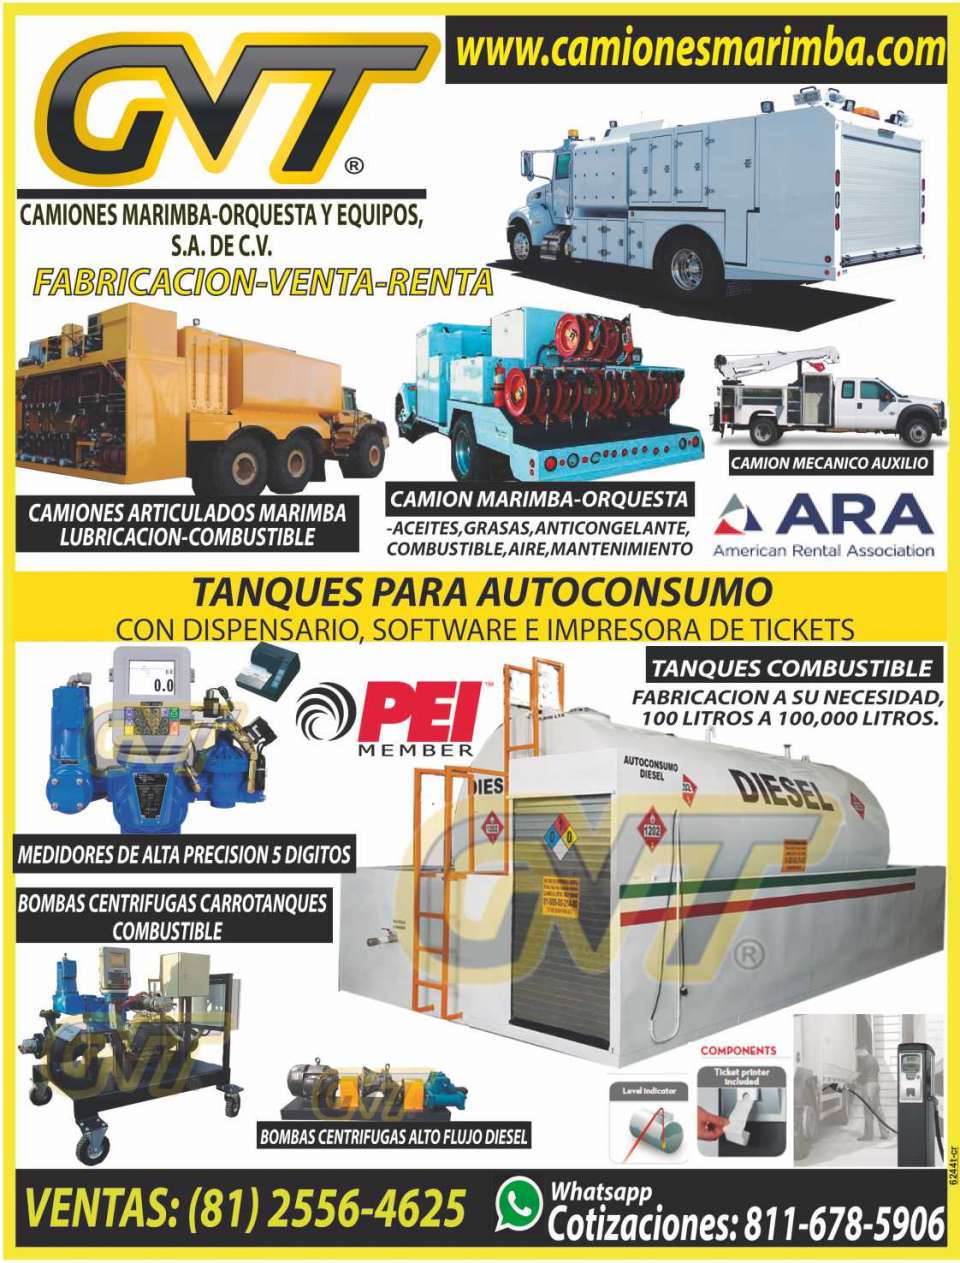 Fuel and Lubrication Systems, Loading and Unloading Schedule Softwares, Filled by the PEMEX Fund, Marimba Trucks, Orchestra, Nurse, Miners, Tanks, Pipes